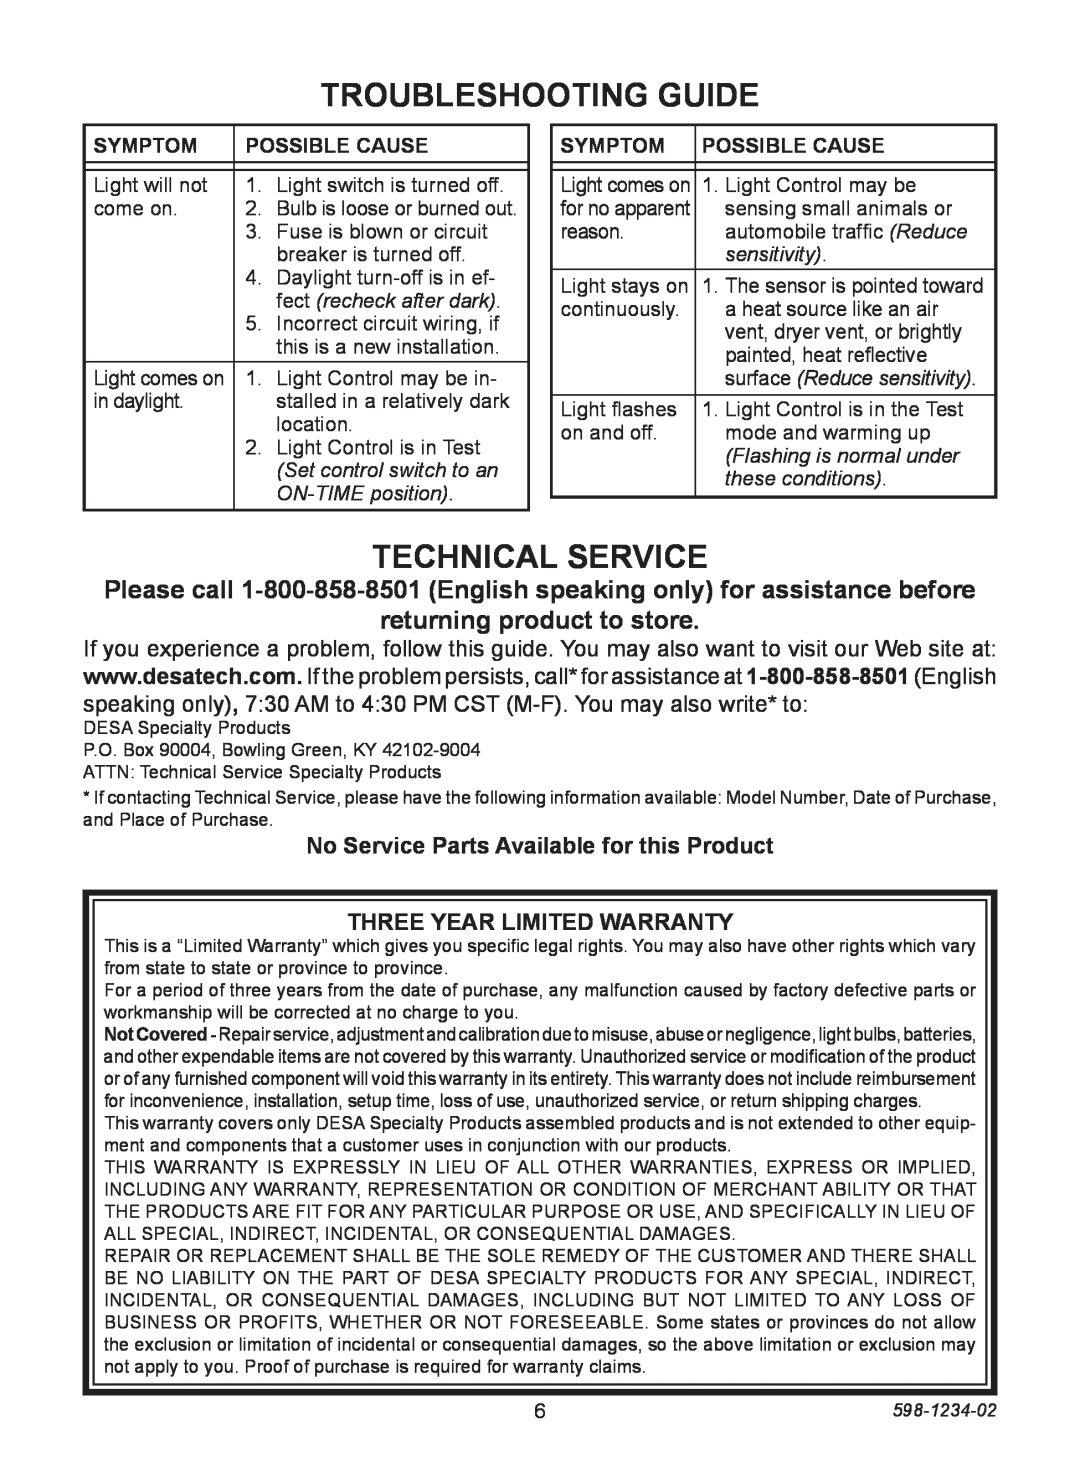 Heath Zenith PF-4290 Series Troubleshooting Guide, Technical Service, returning product to store, Symptom, Possible Cause 